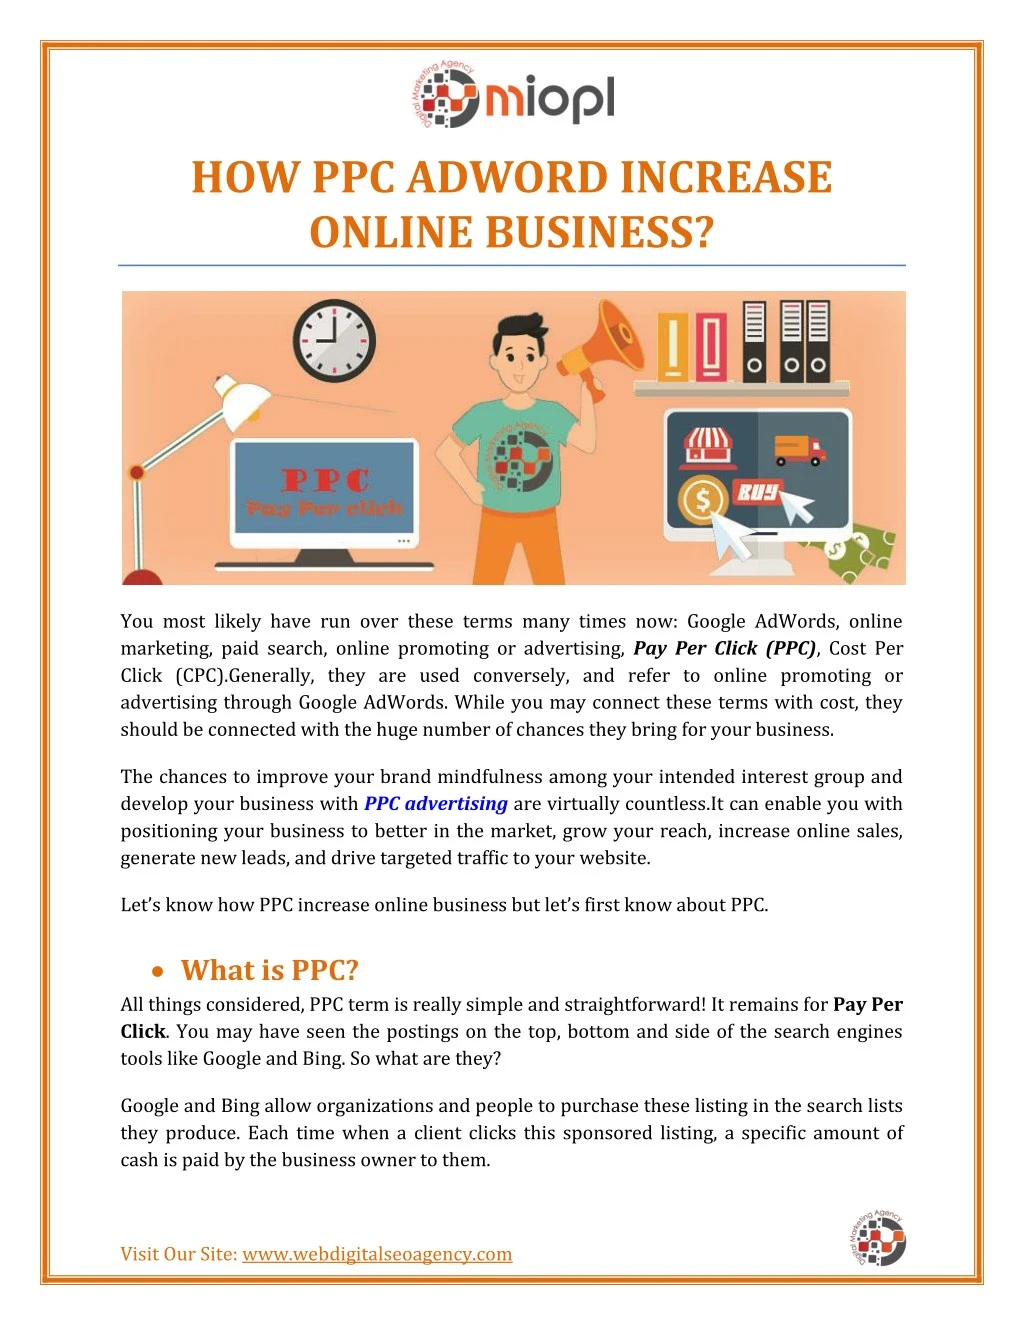 how ppc adword increase online business